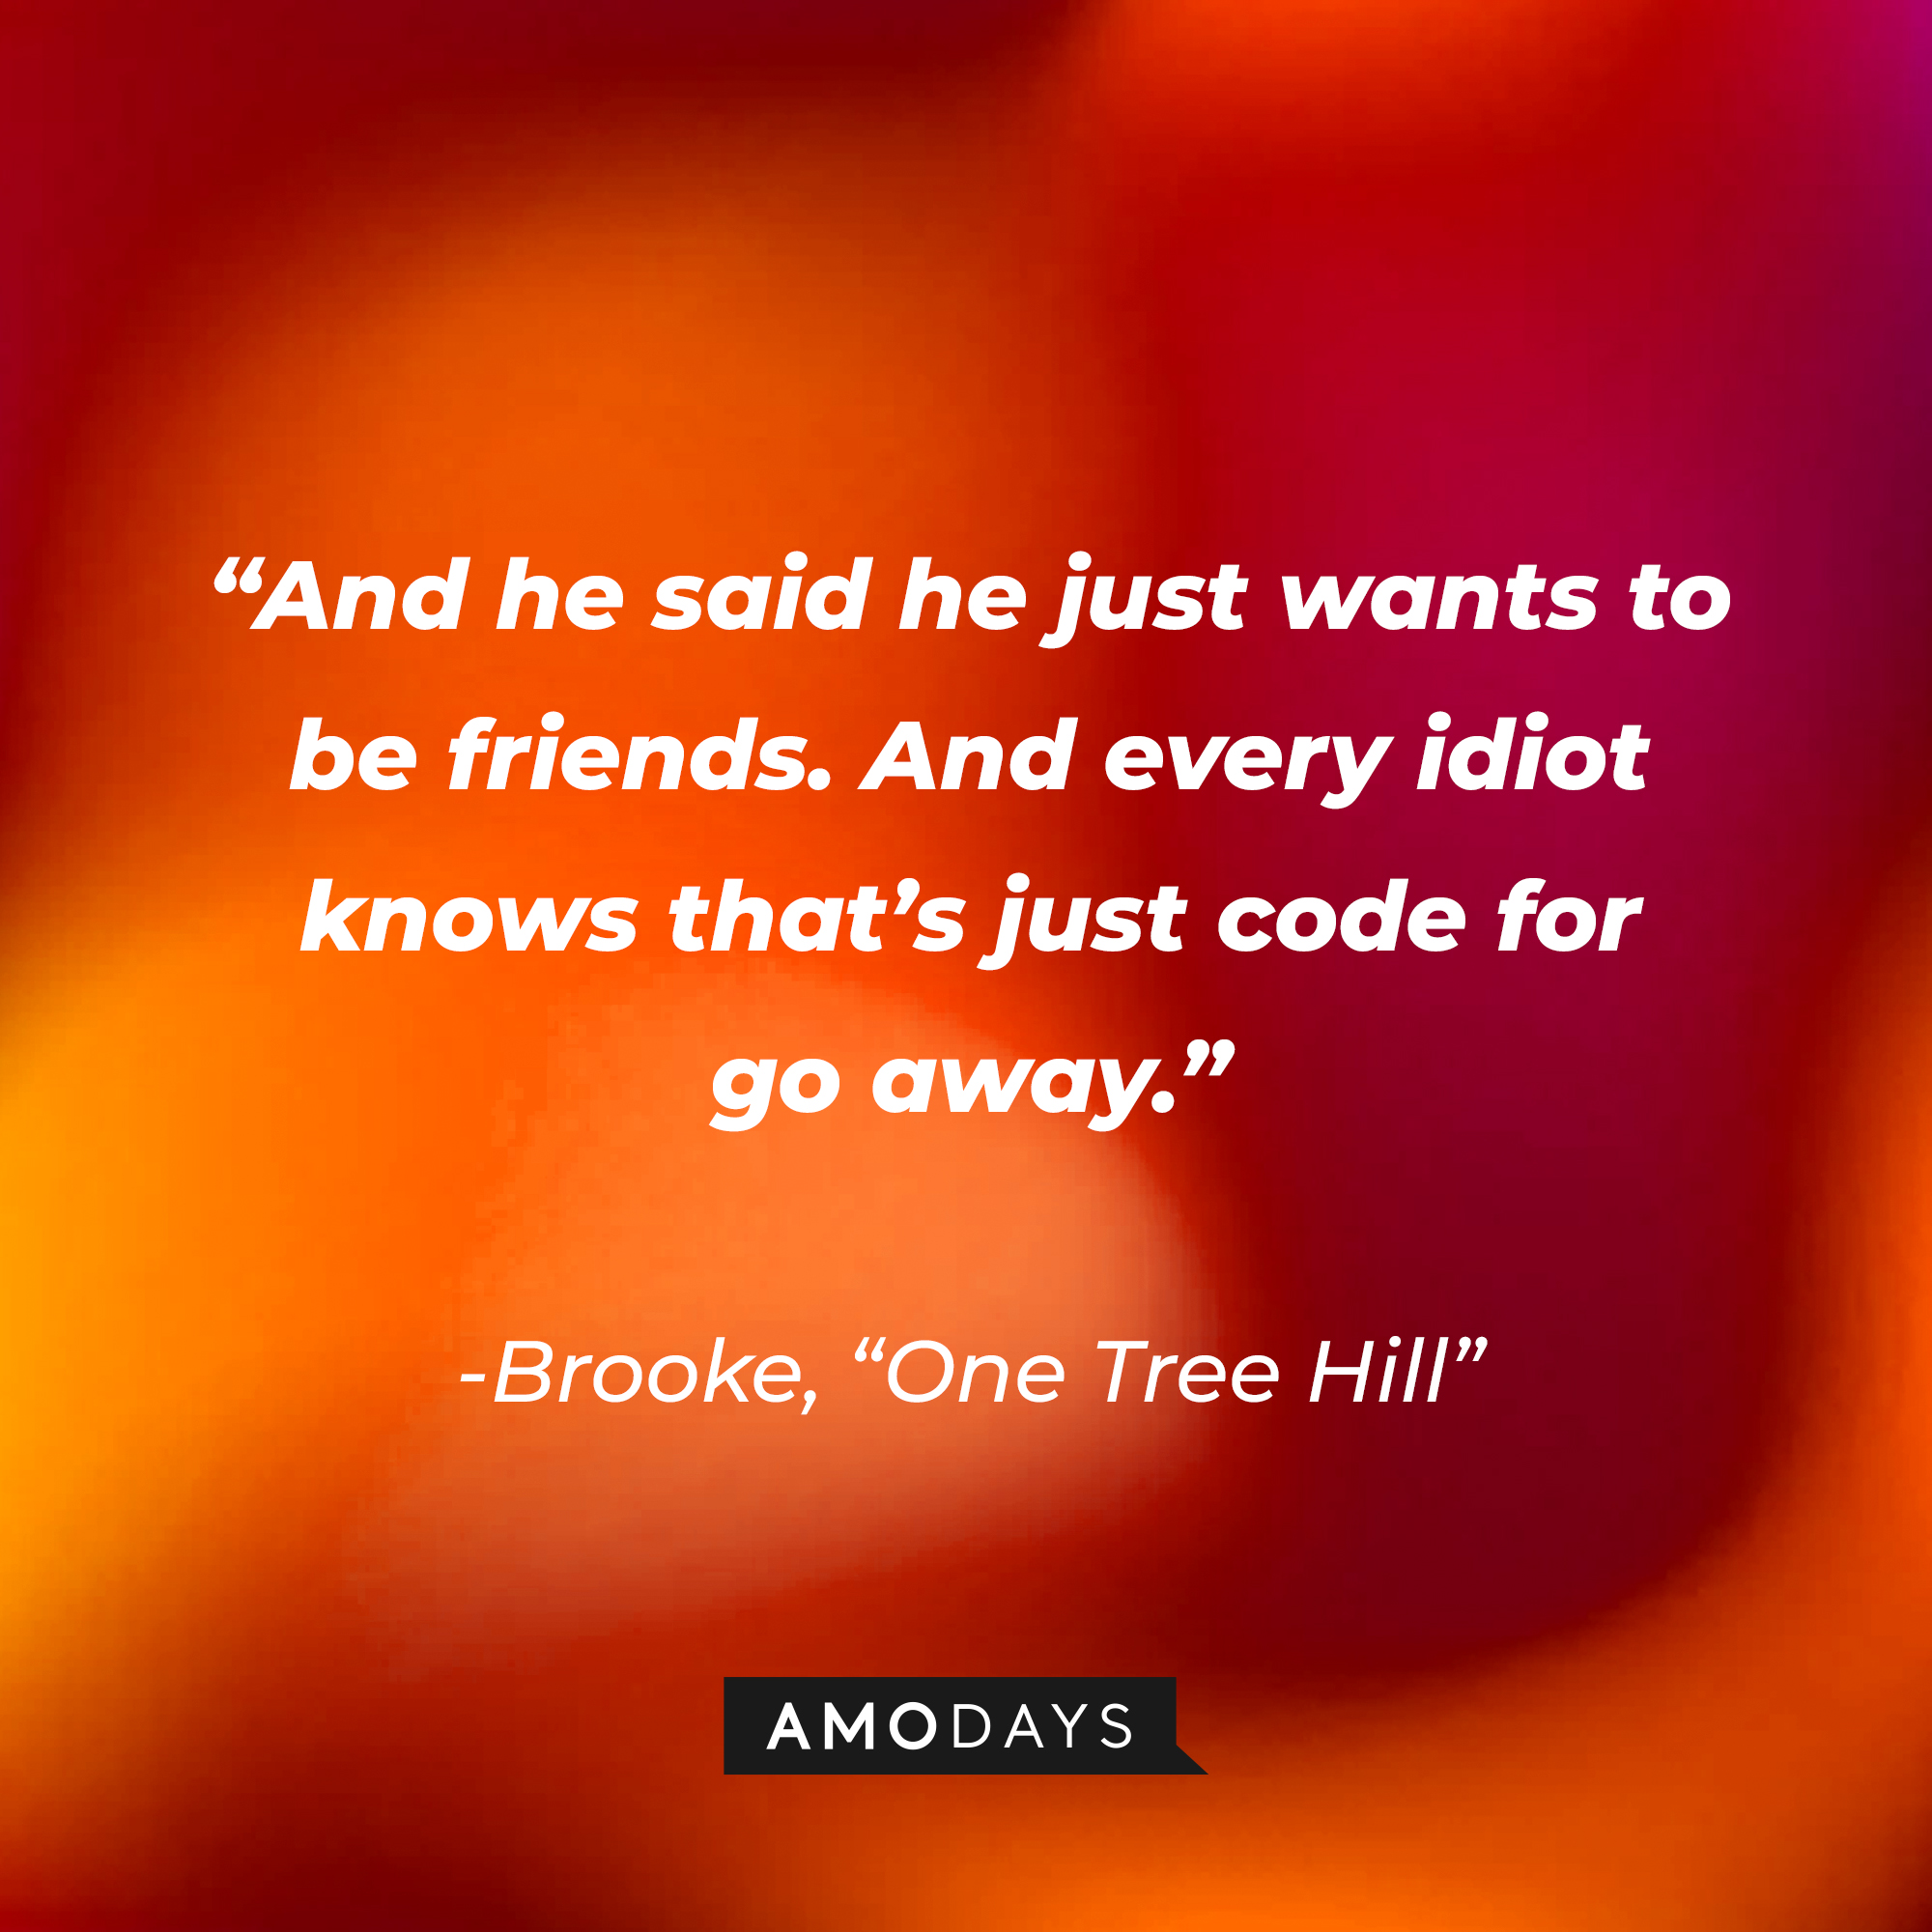 Brooke’s quote from “One Tree Hill”: “And he said he just wants to be friends. And every idiot knows that’s just code for go away.” | Source: AmoDays